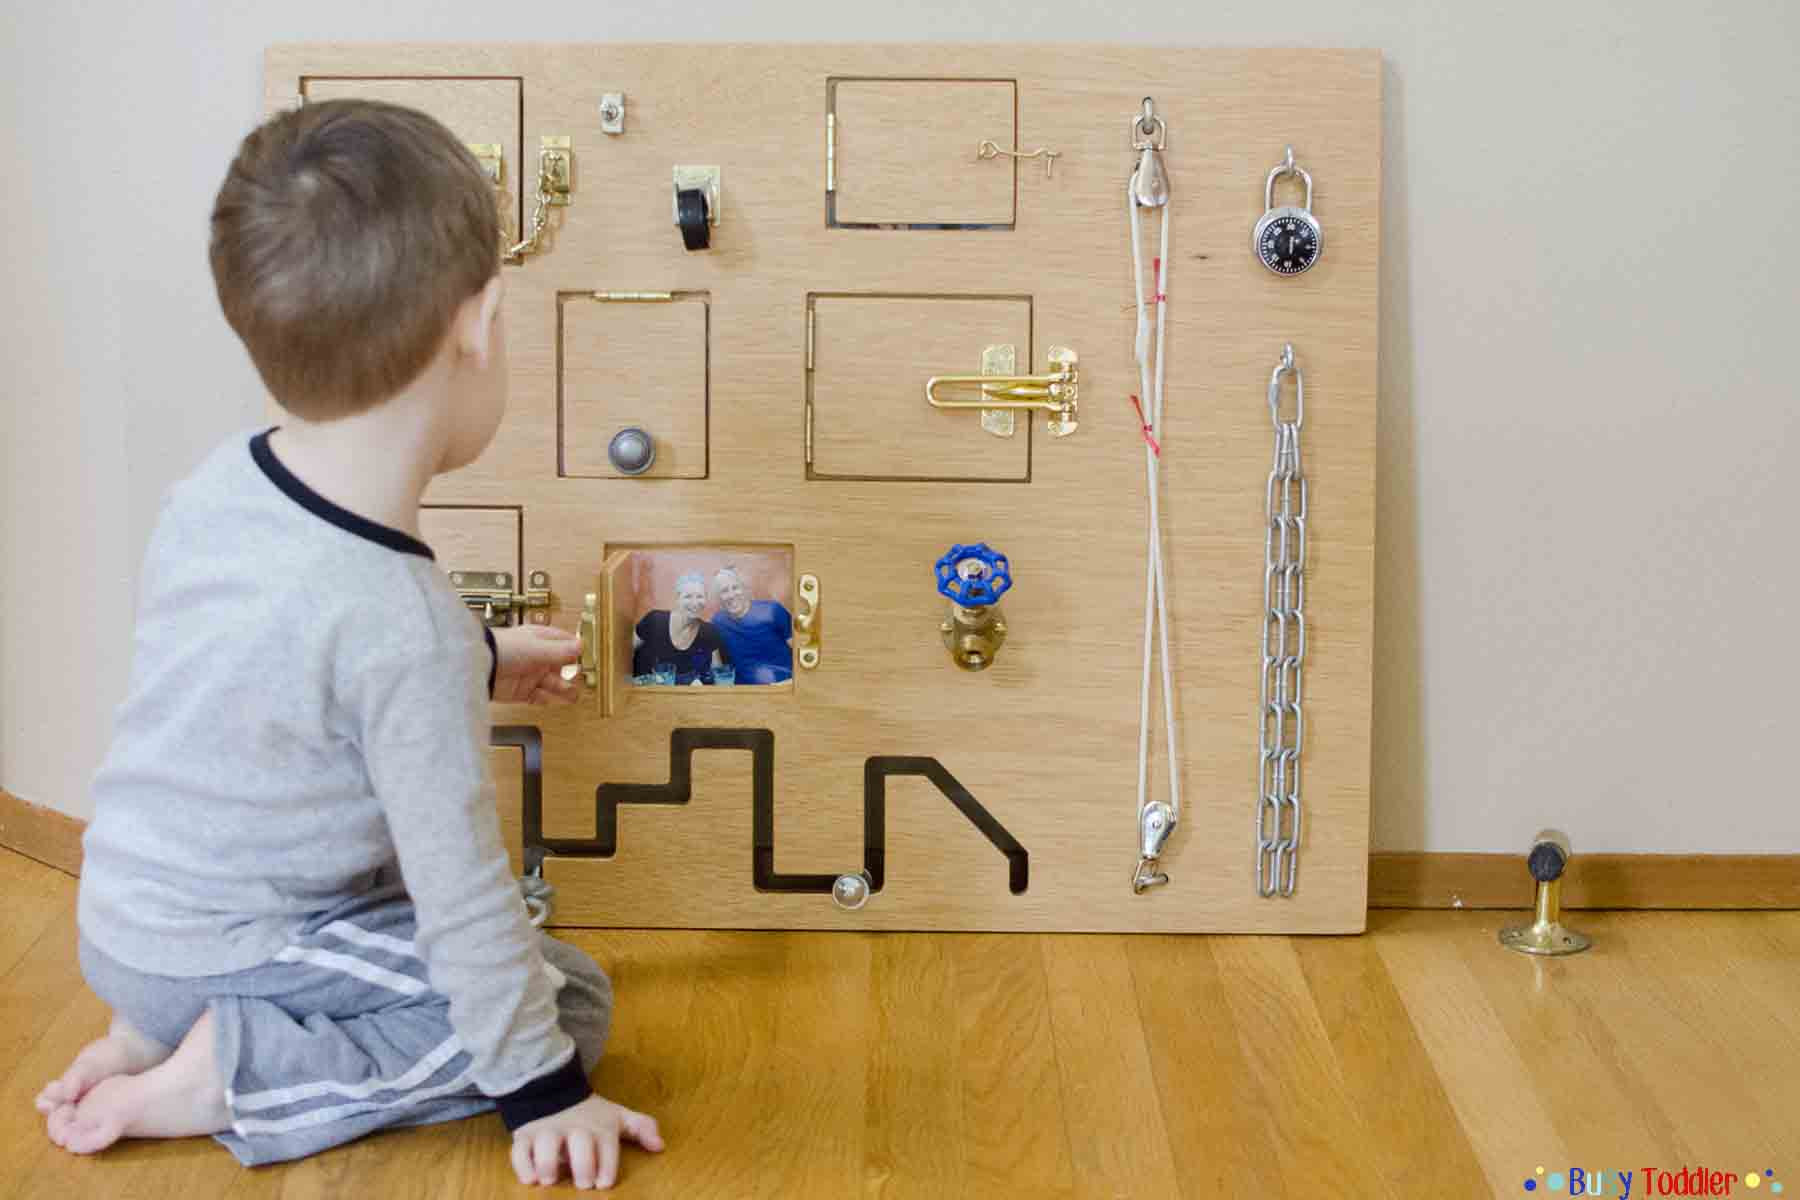 Toddler Busy Board DIY
 Toddler Busy Board Peek a Boo Edition Busy Toddler